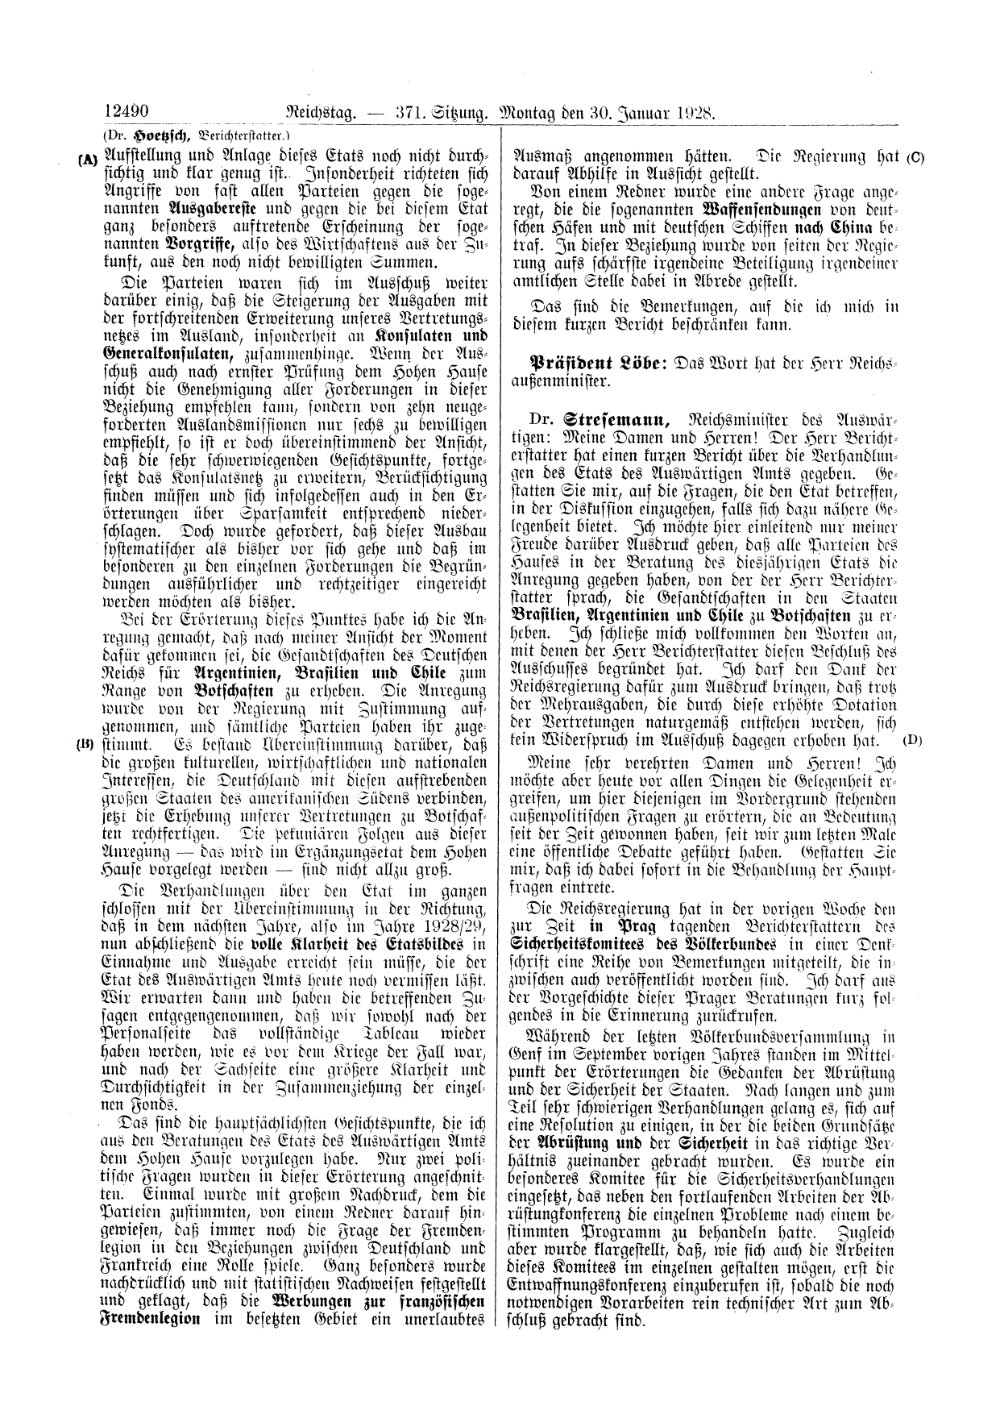 Scan of page 12490